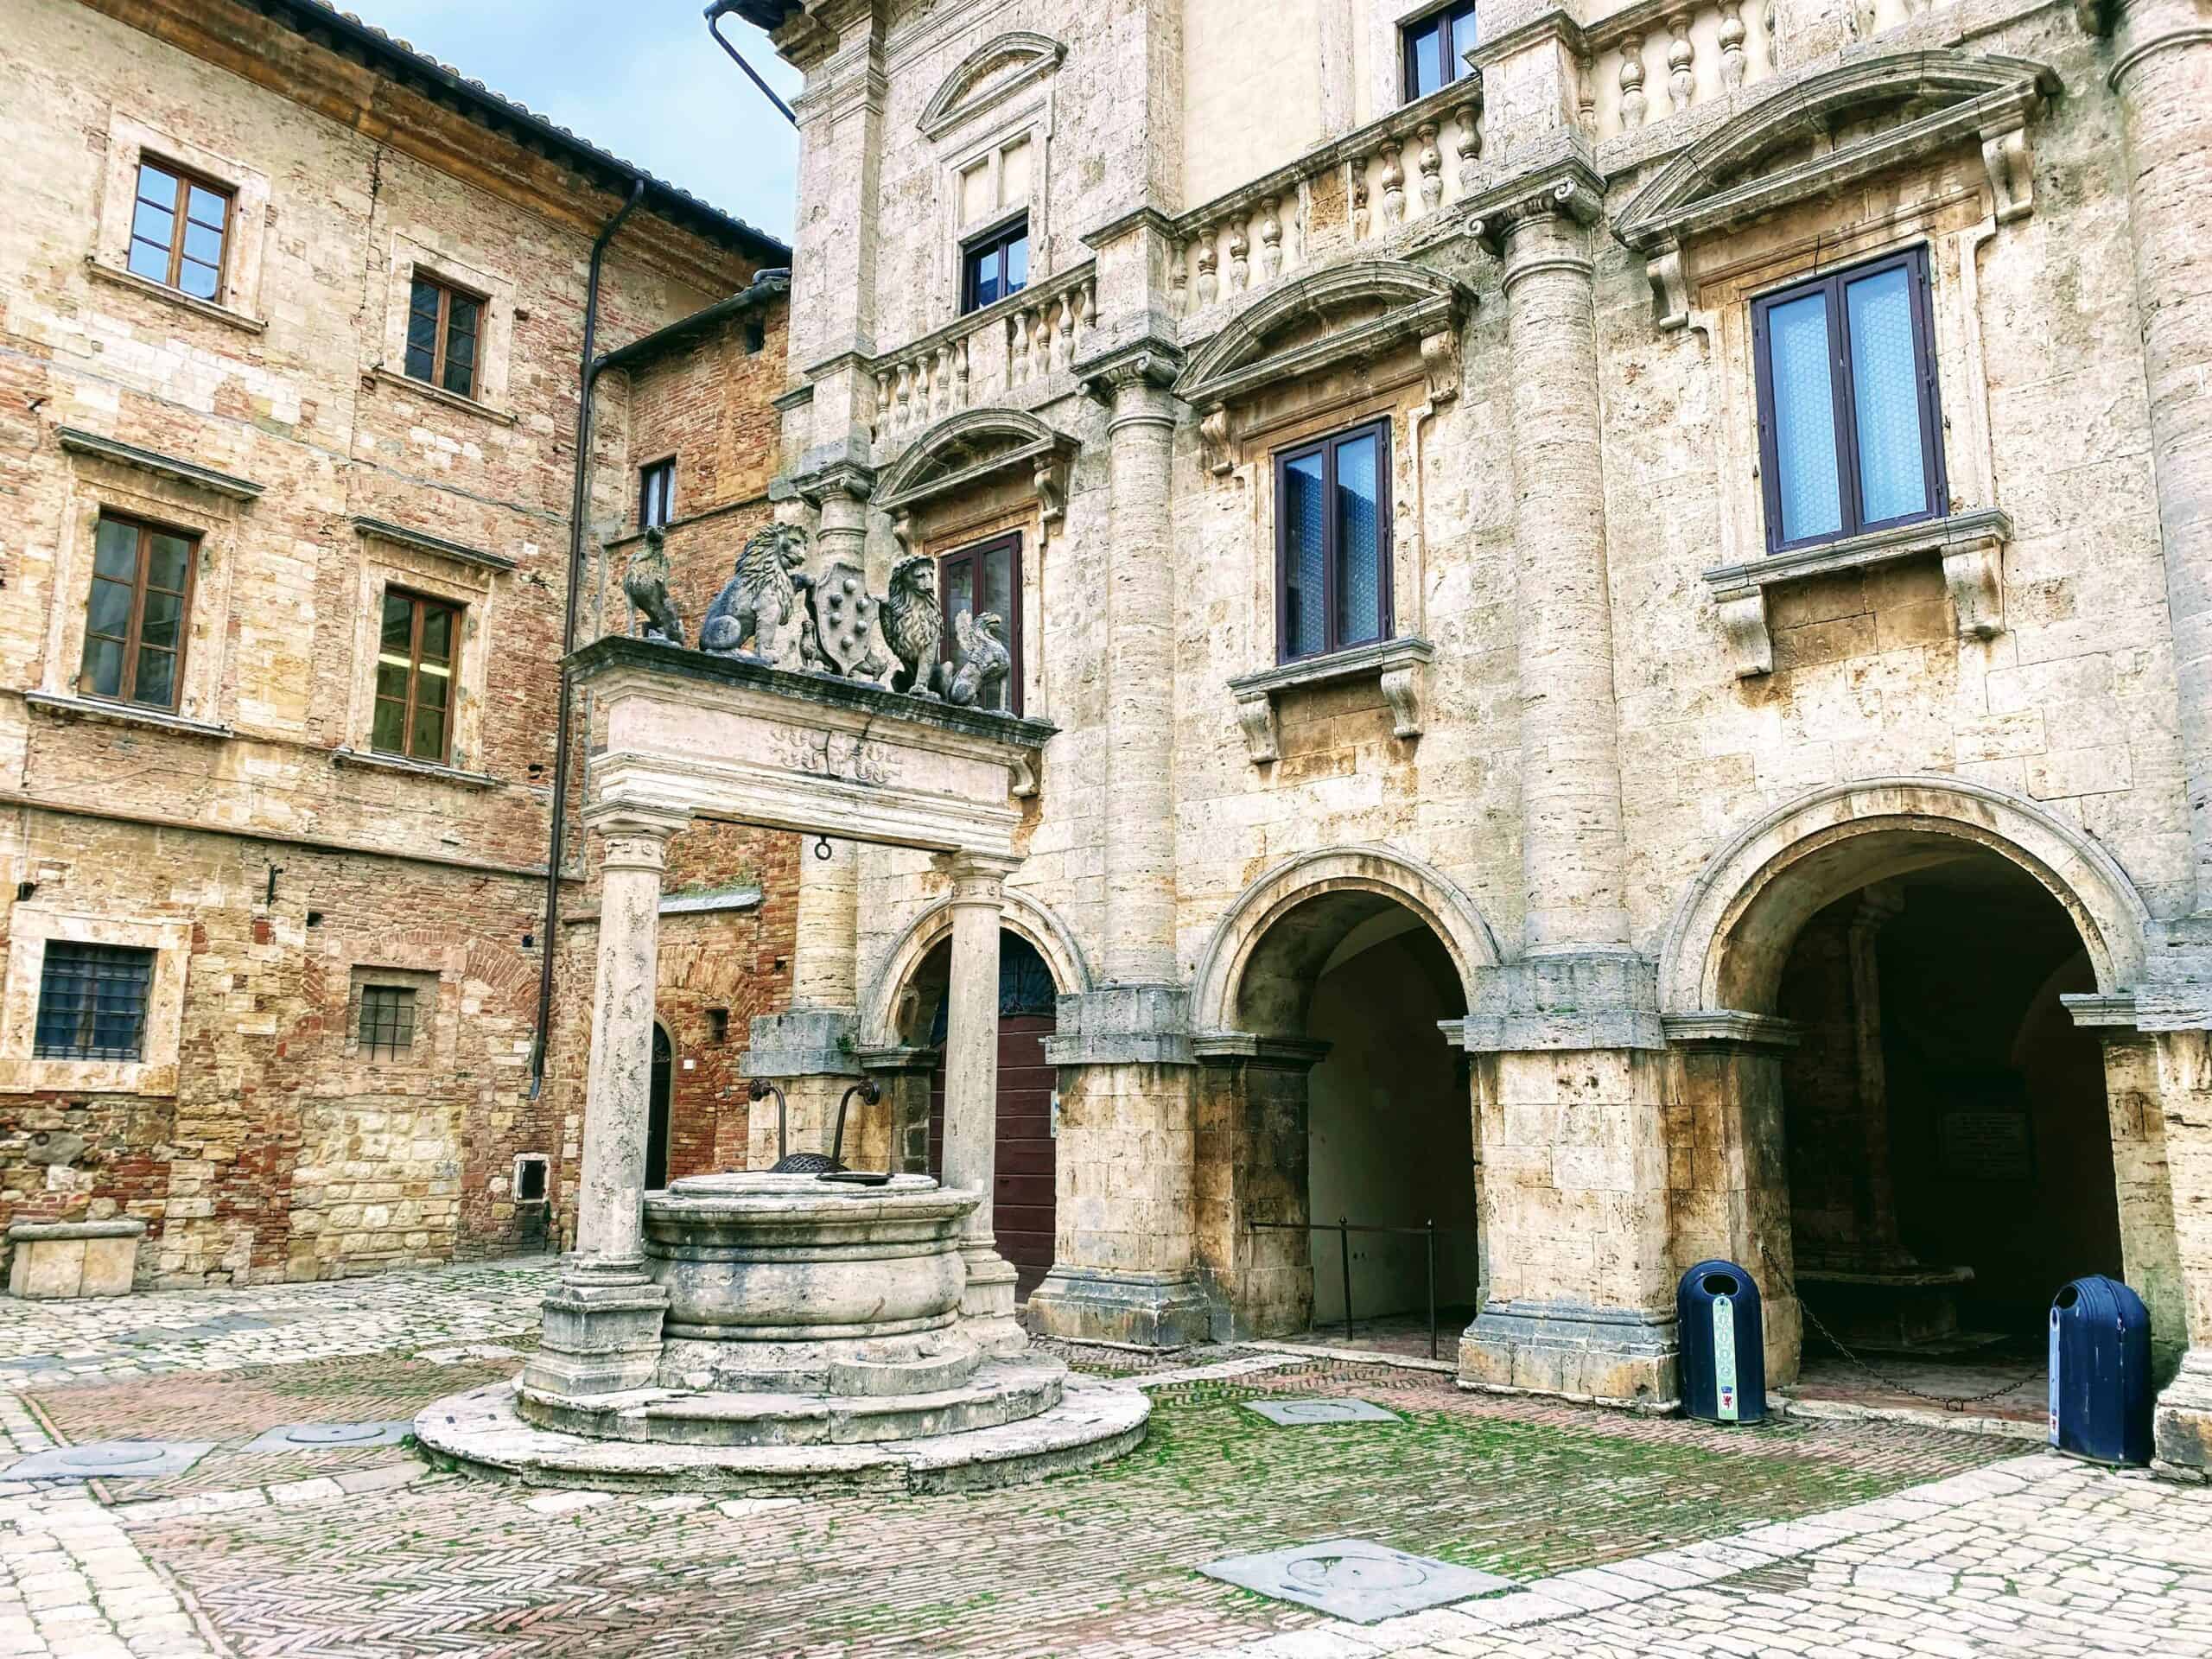 Stone well in corner of piazza. Grass growing in cracks between bricks on the ground. Lions and Medici crest with 6 balls decorate top part of well.Stone buildings in background.